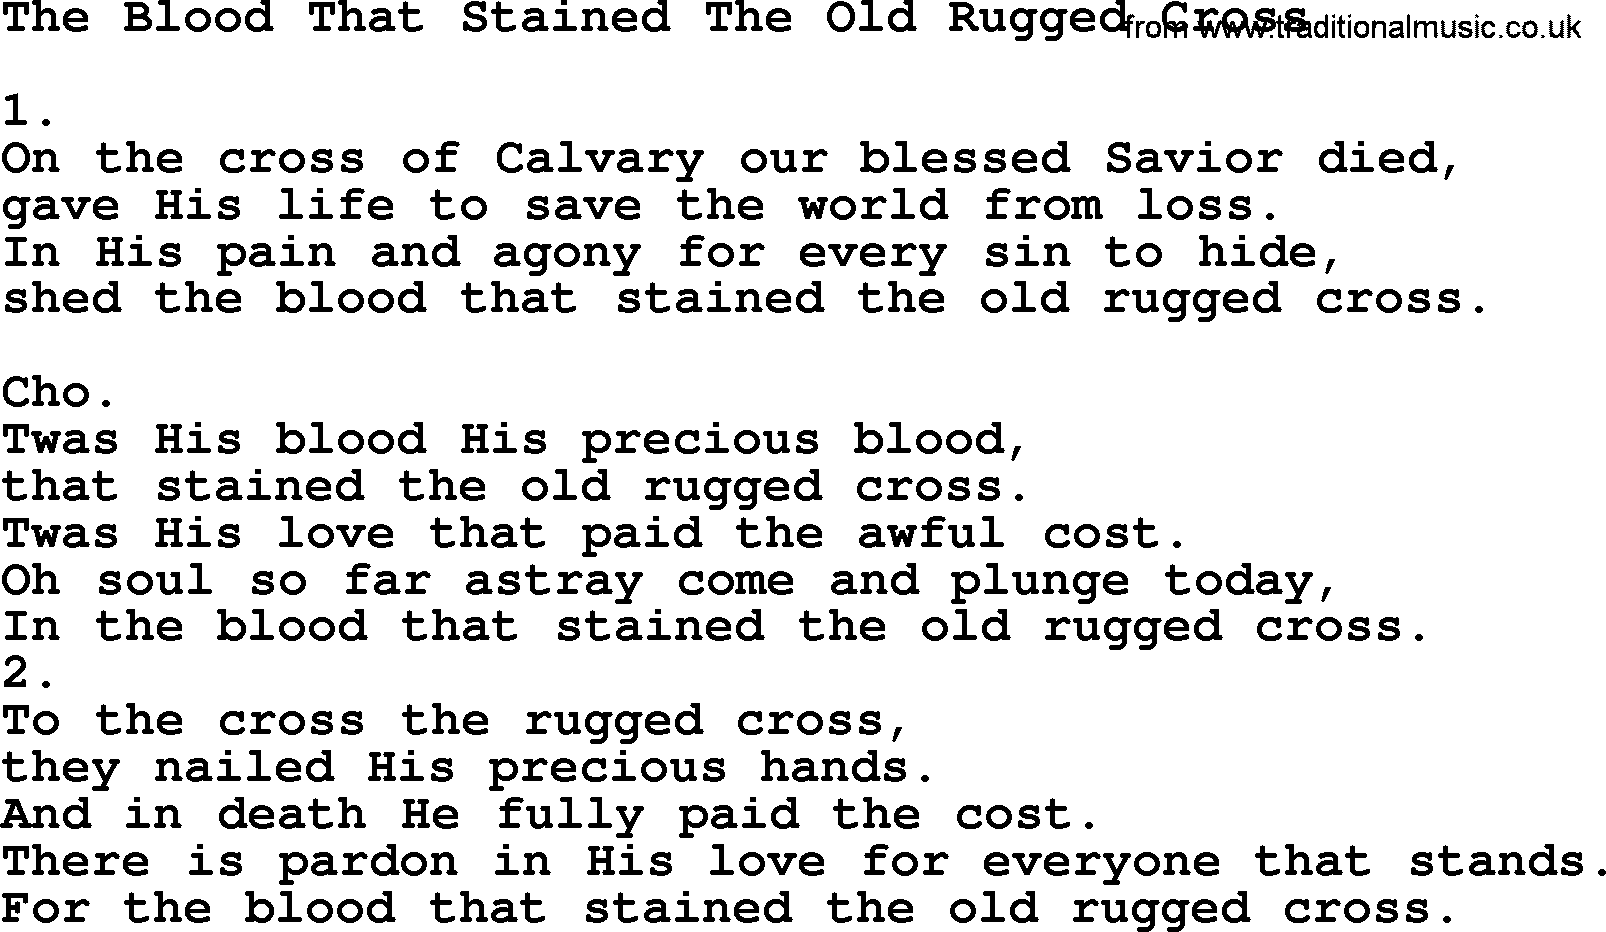 Apostolic & Pentecostal Hymns and Songs, Hymn: The Blood That Stained The Old Rugged Cross lyrics and PDF